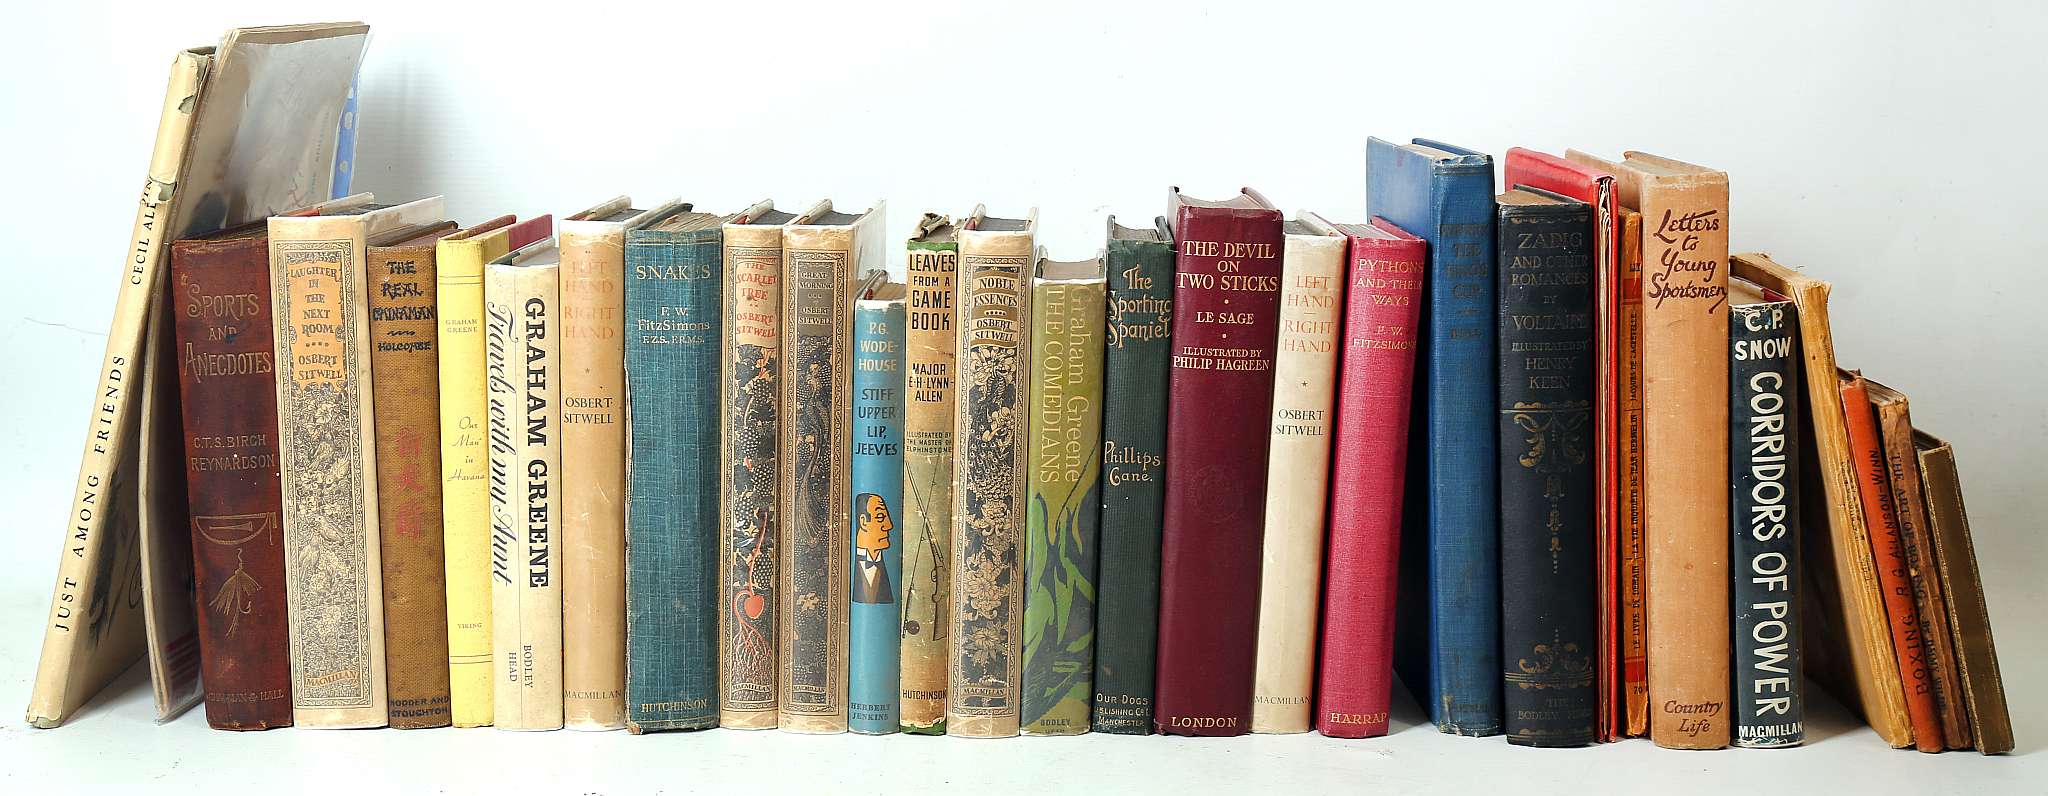 BOOKS. MISCELLANY. A selection of modern first editions, including works by Osbert Sitwell. With